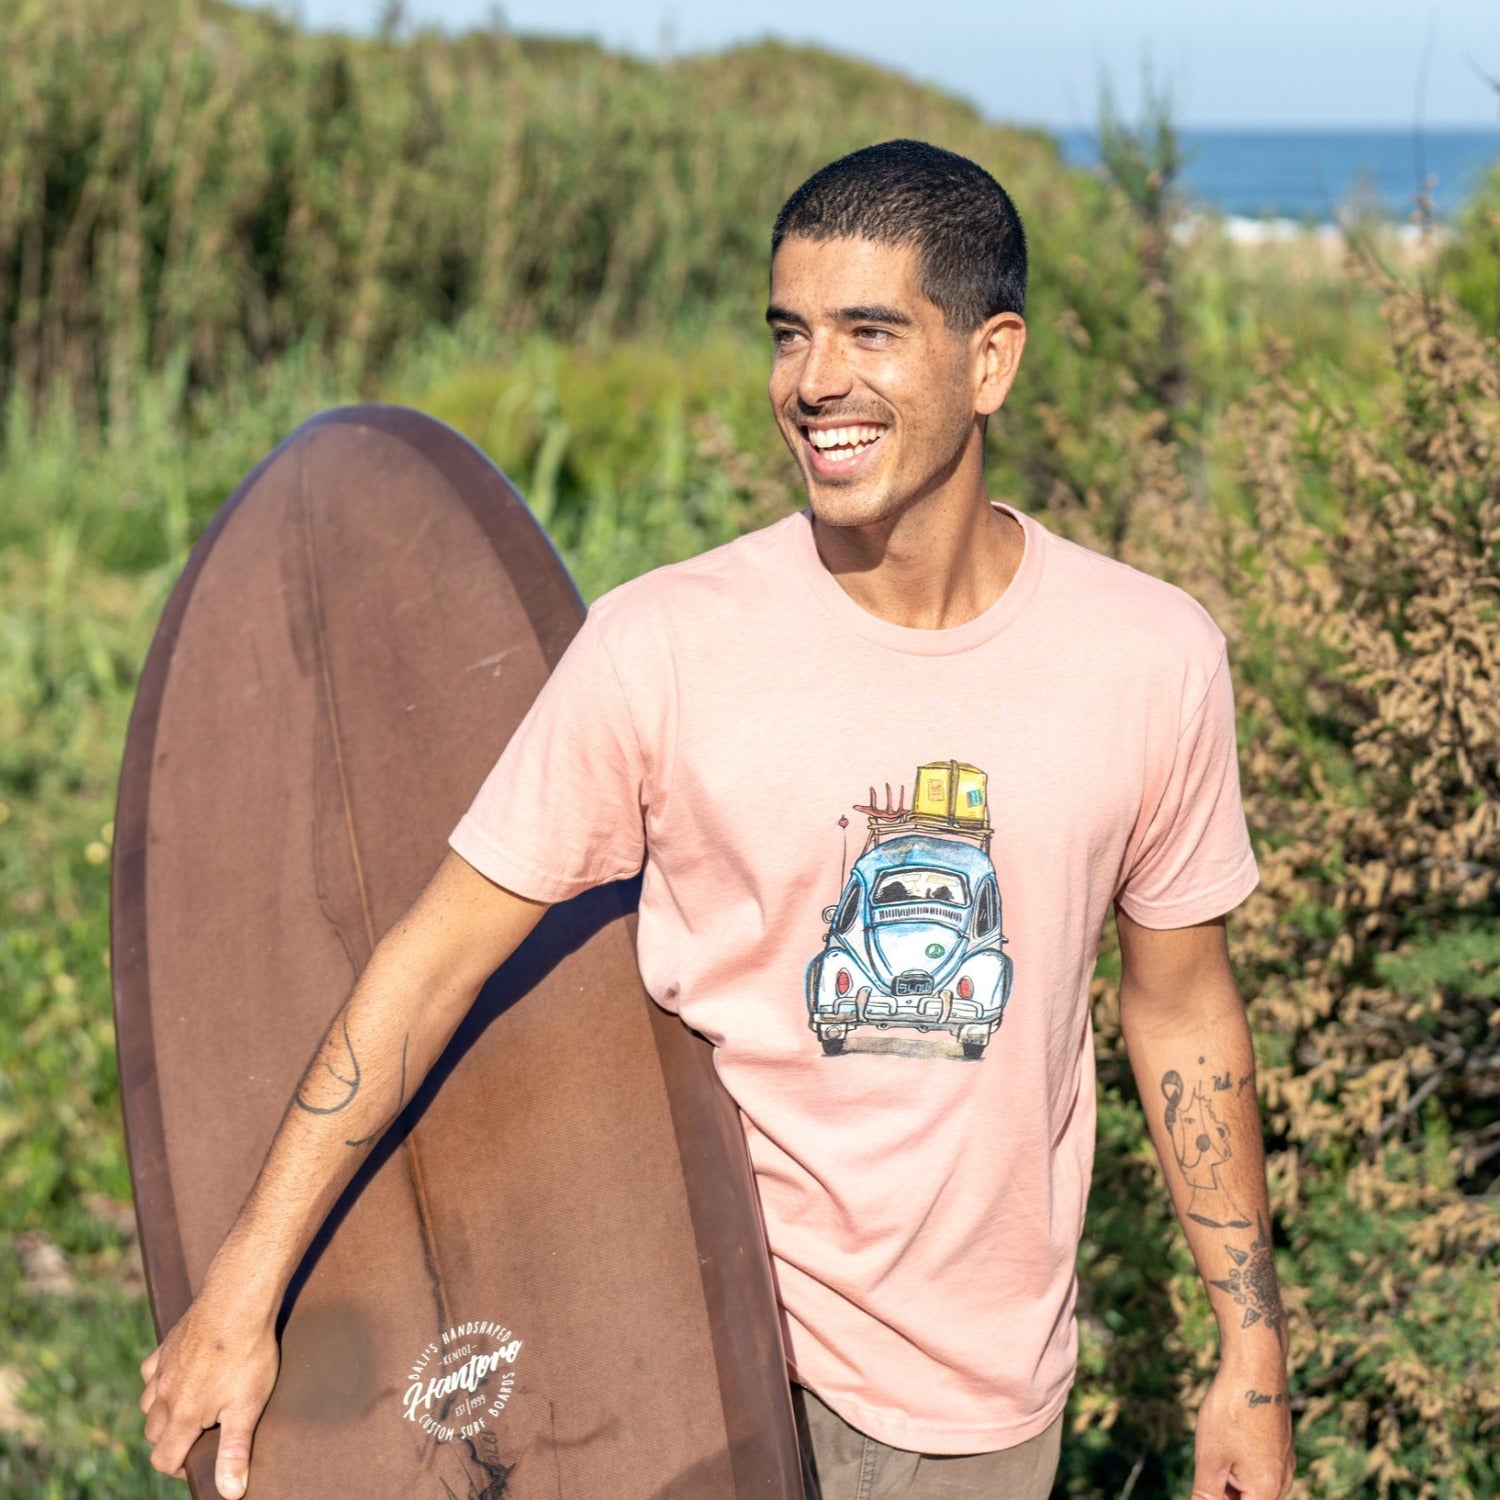 Man carrying surfboard while wearing pink shirt with a VW bug on it. 